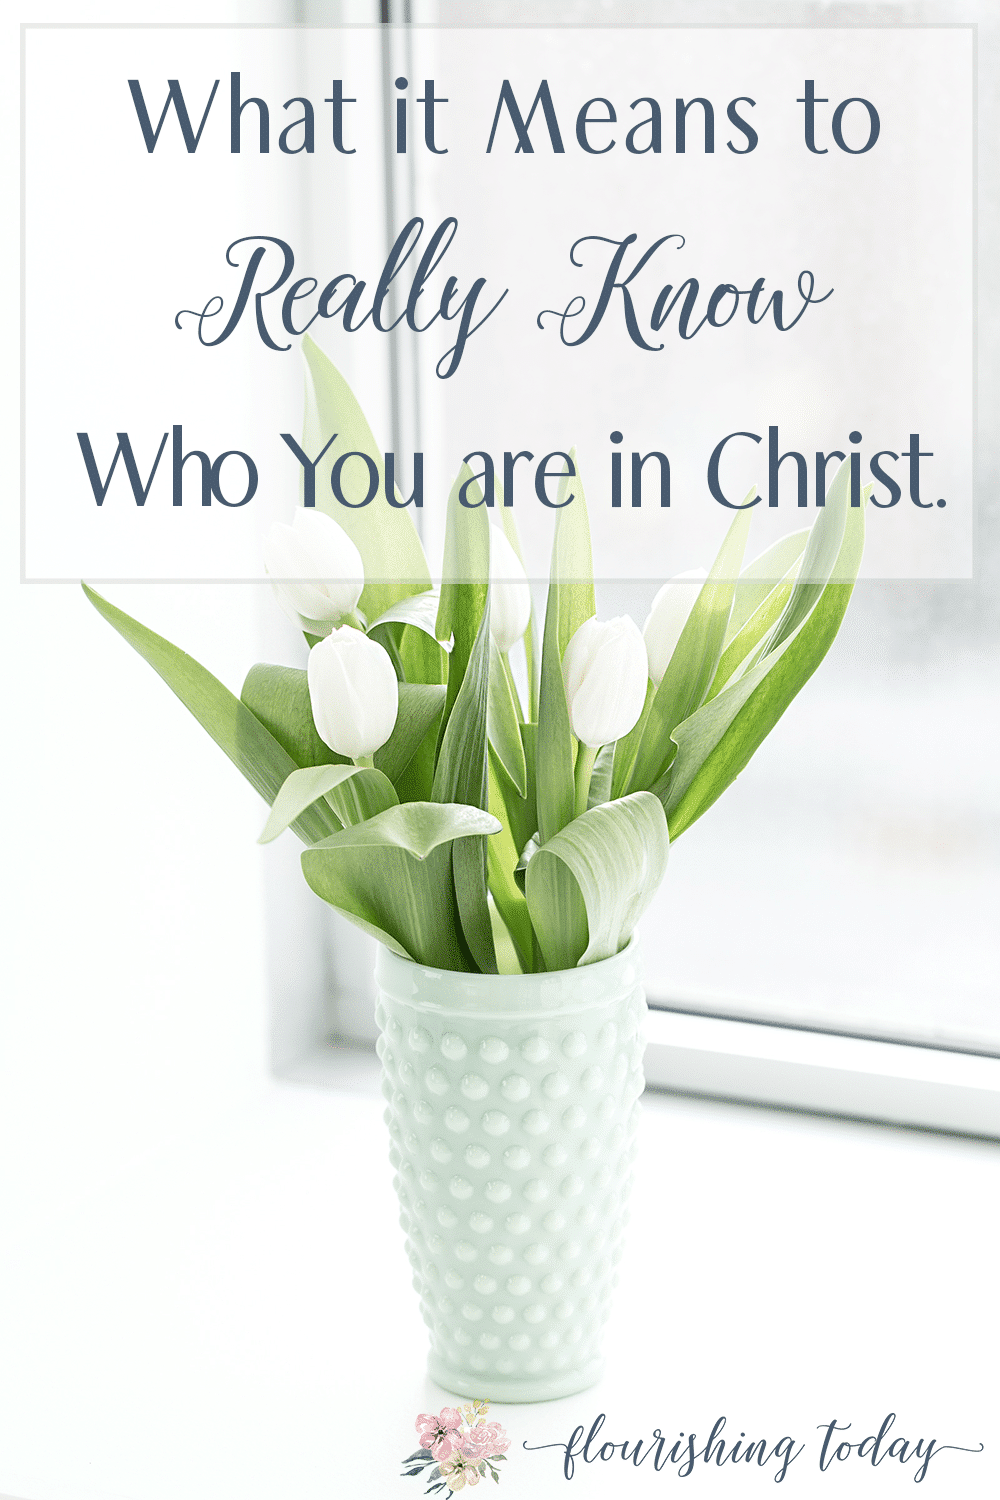 Do you ever wonder what it means to know who you are in Christ? You are not alone! For years I wondered what it meant to know who I am in Christ. To understand who we are we have to know who God is. Here are scriptures to help you know who you are in Christ! #freeprintable #identity #prayers #promises